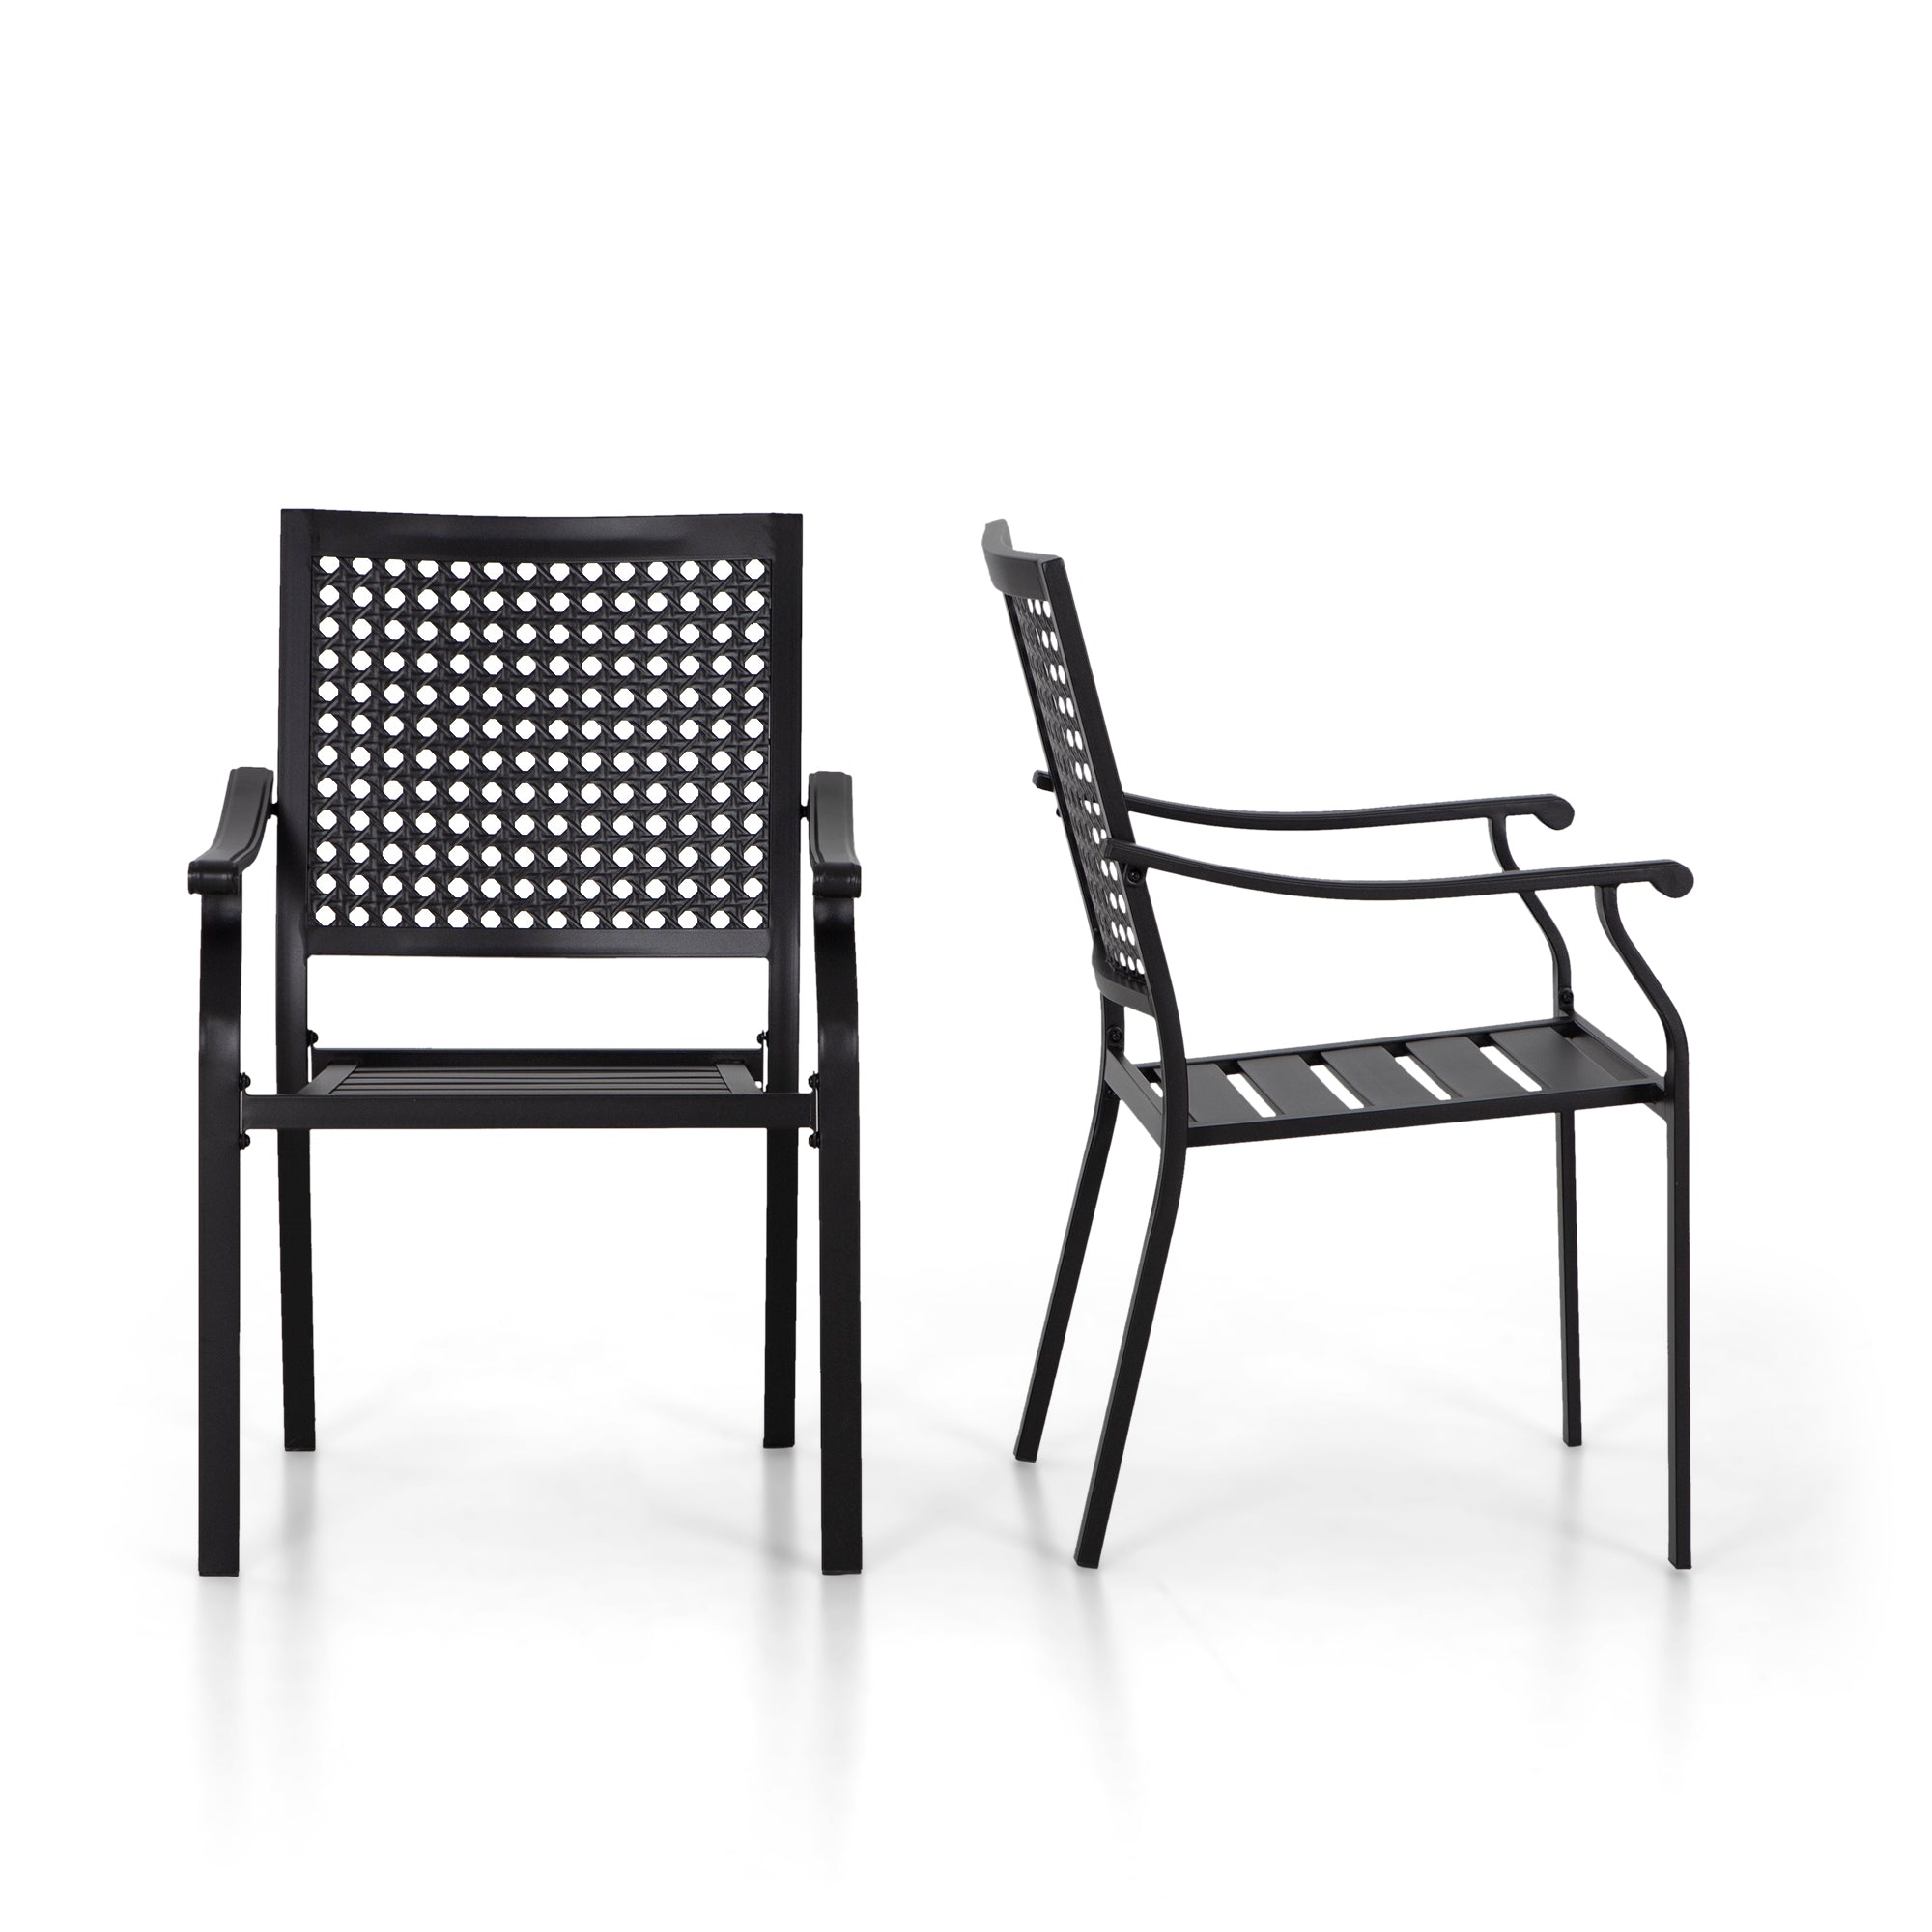 MFSTUDIO 7-Piece Outdoor Dining Set Geometric Rectangle Table & Bull's Eye Pattern Dining Chairs